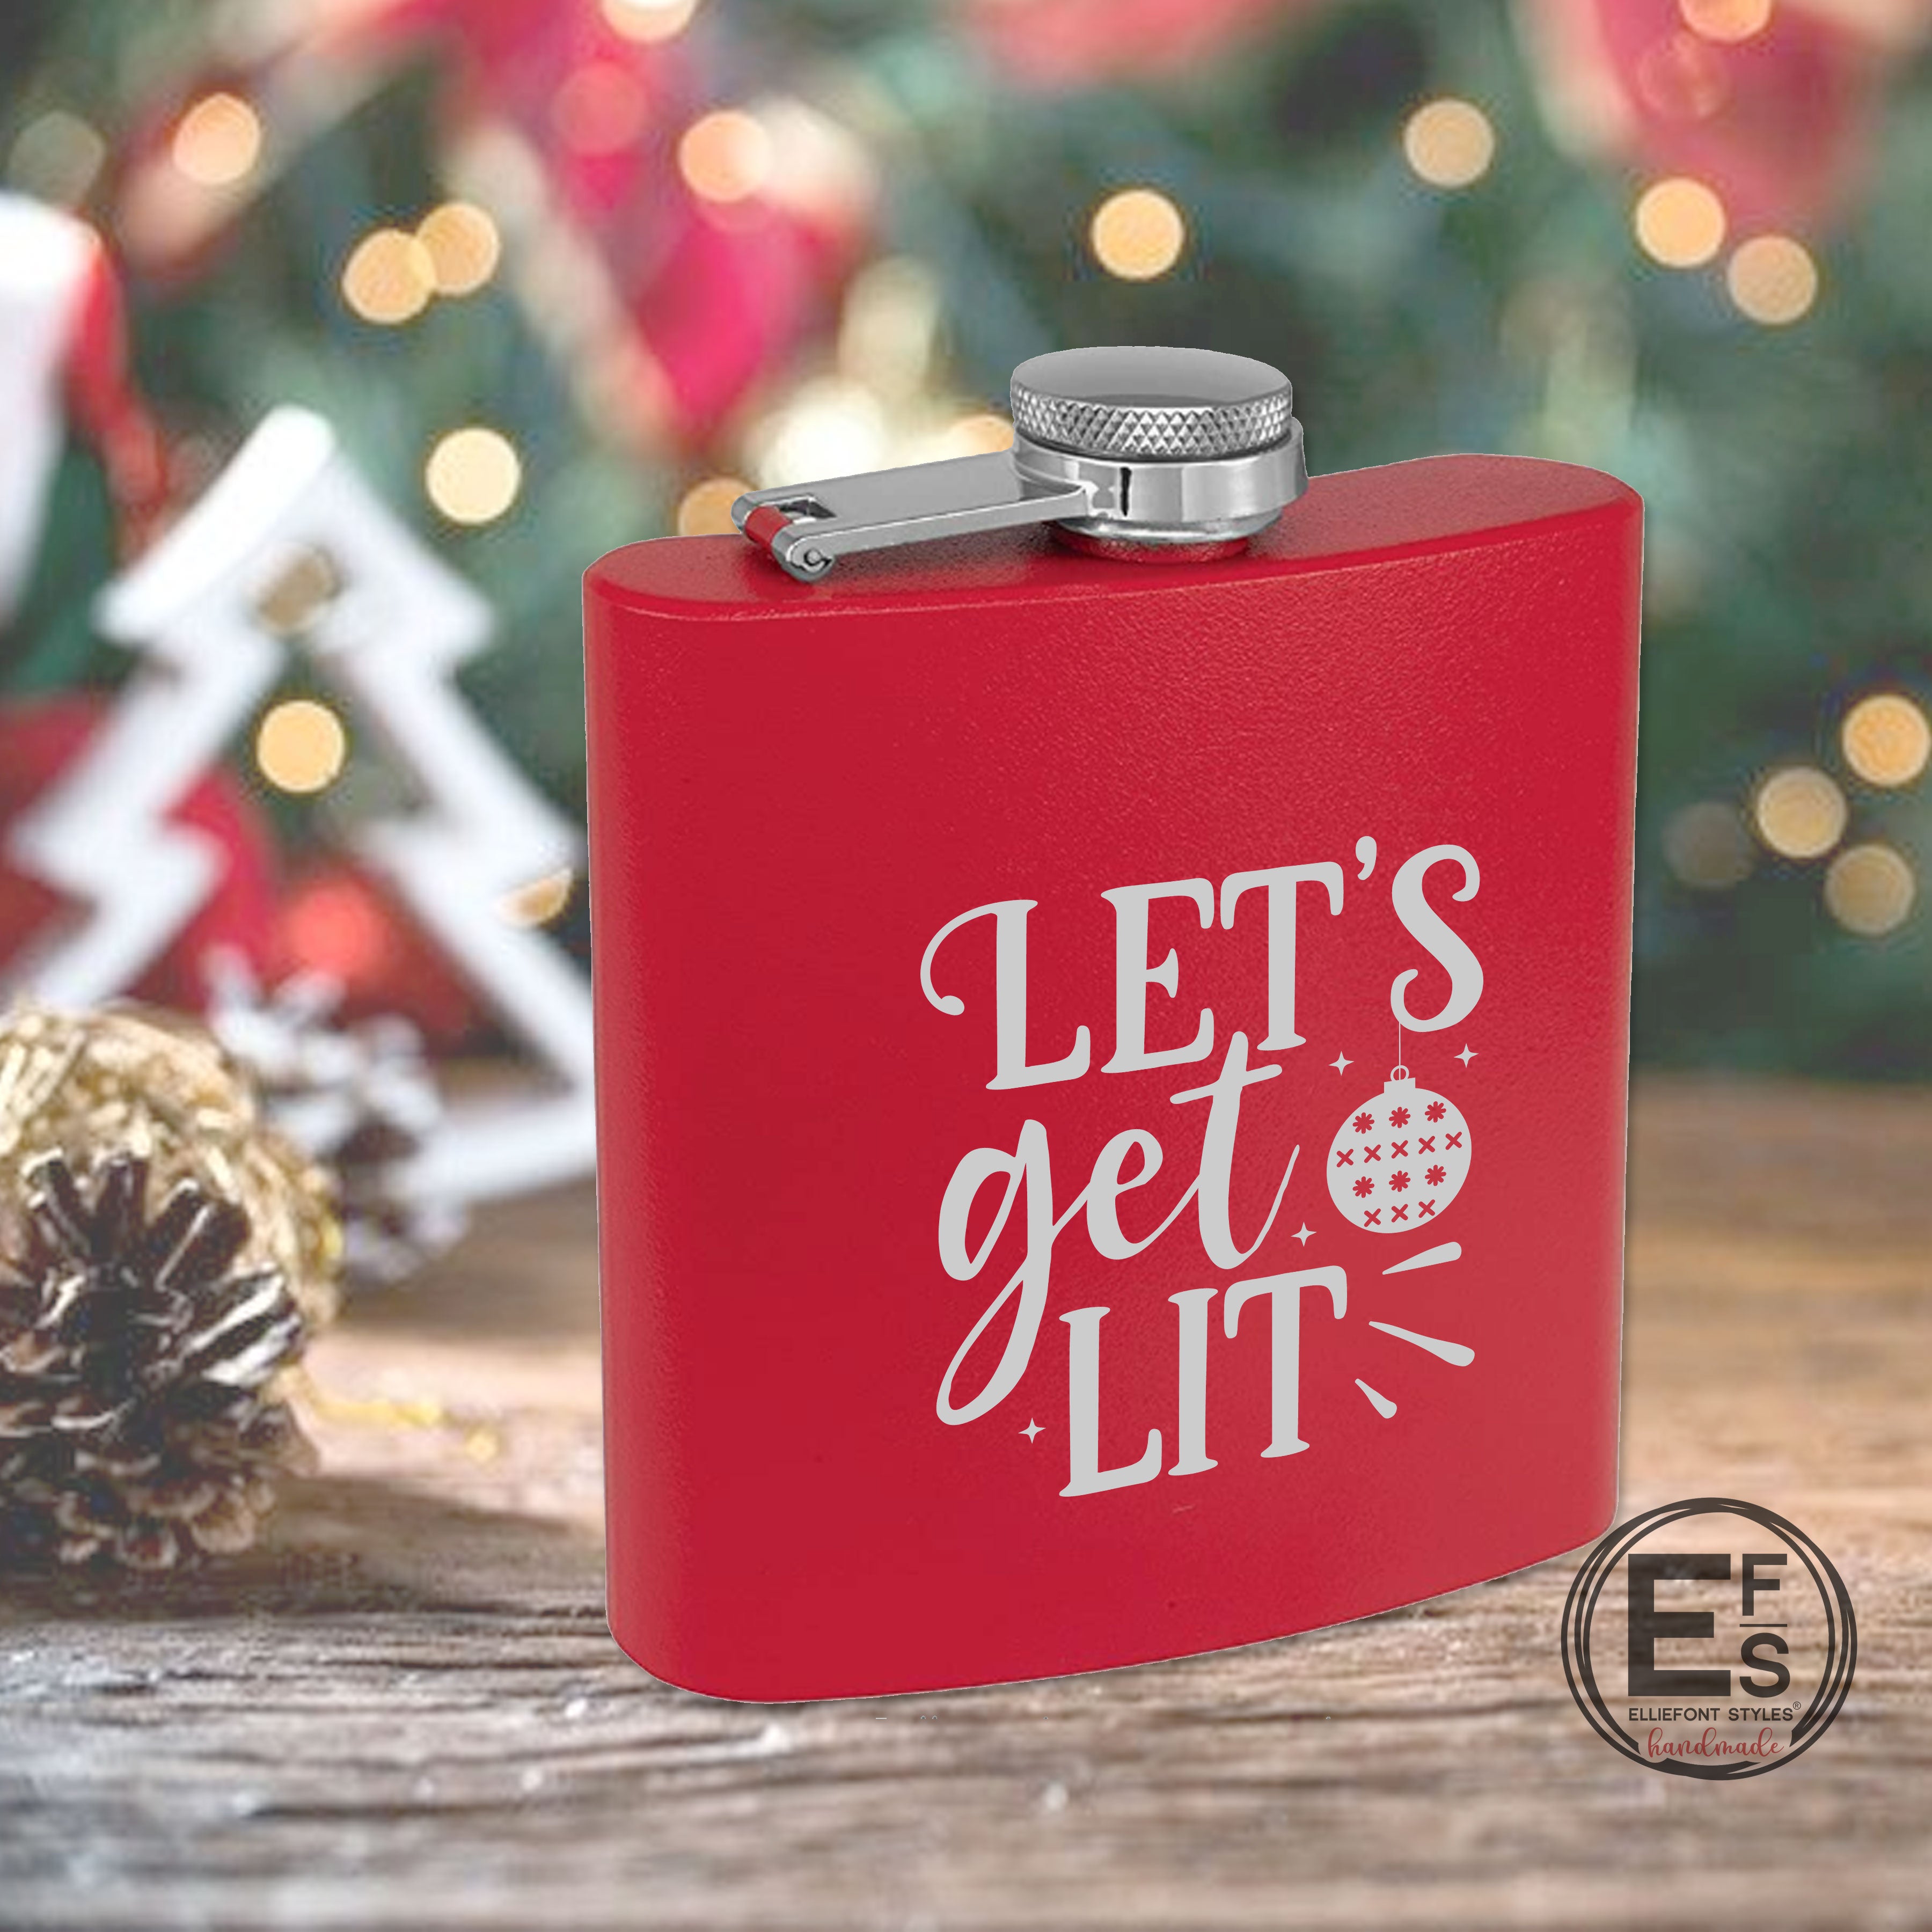 I Like Your Package - Funny Christmas Flask